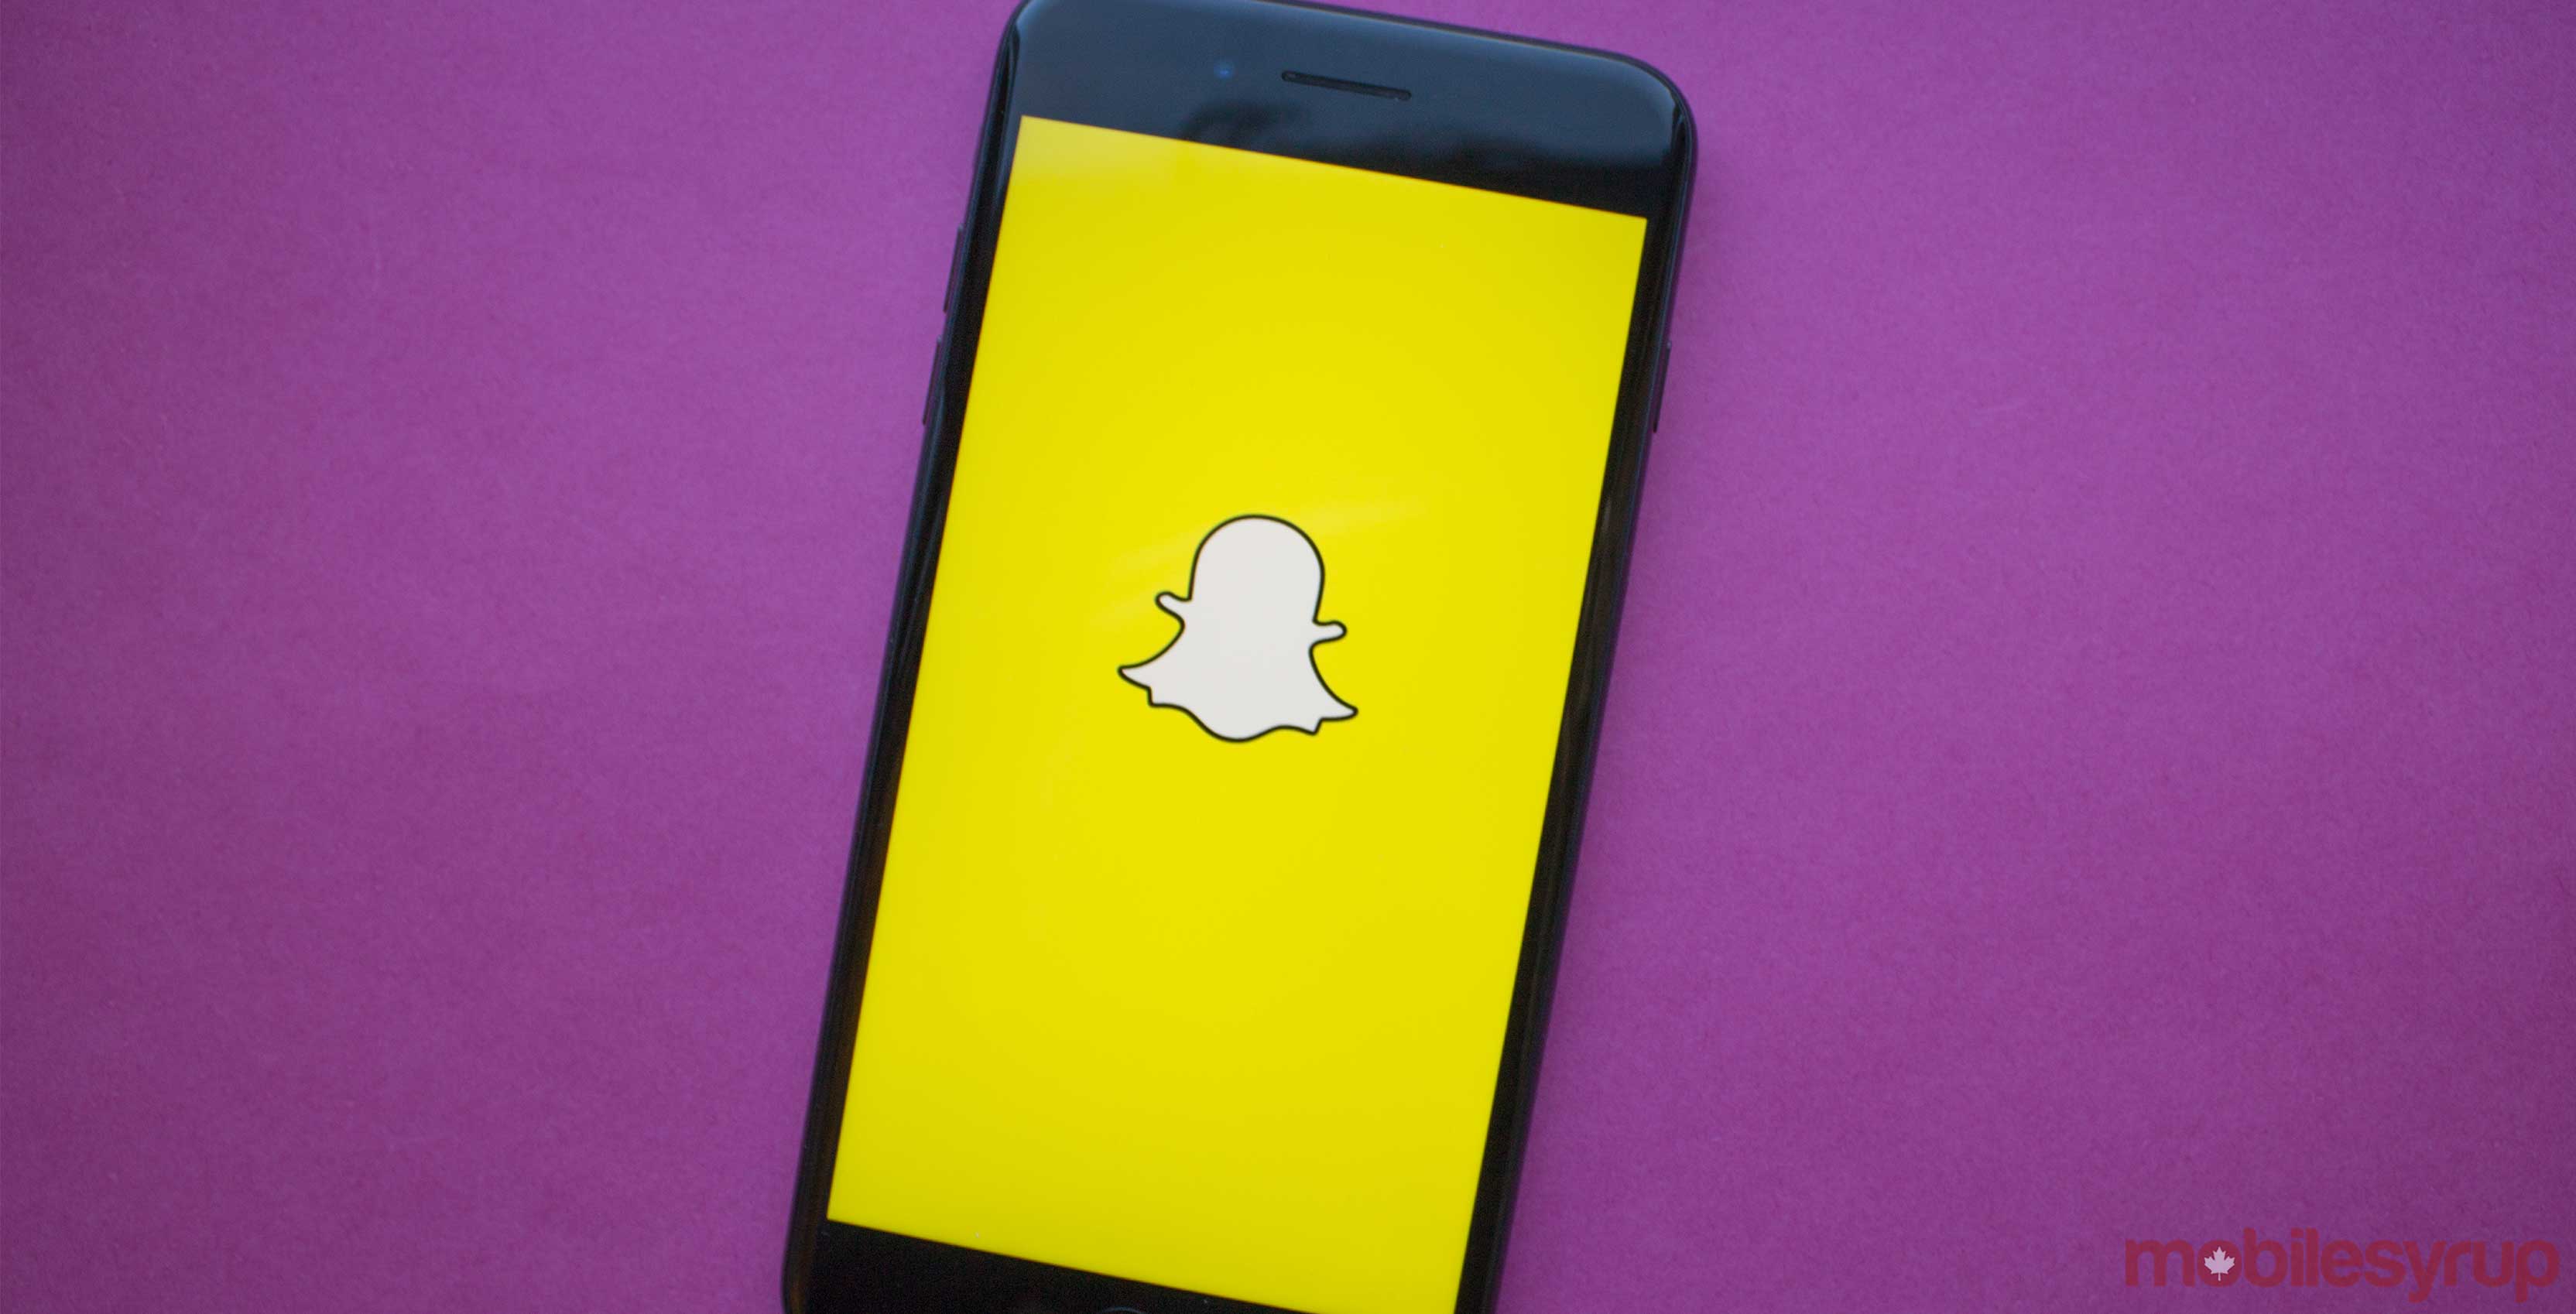 Snapchat partners with Shopify